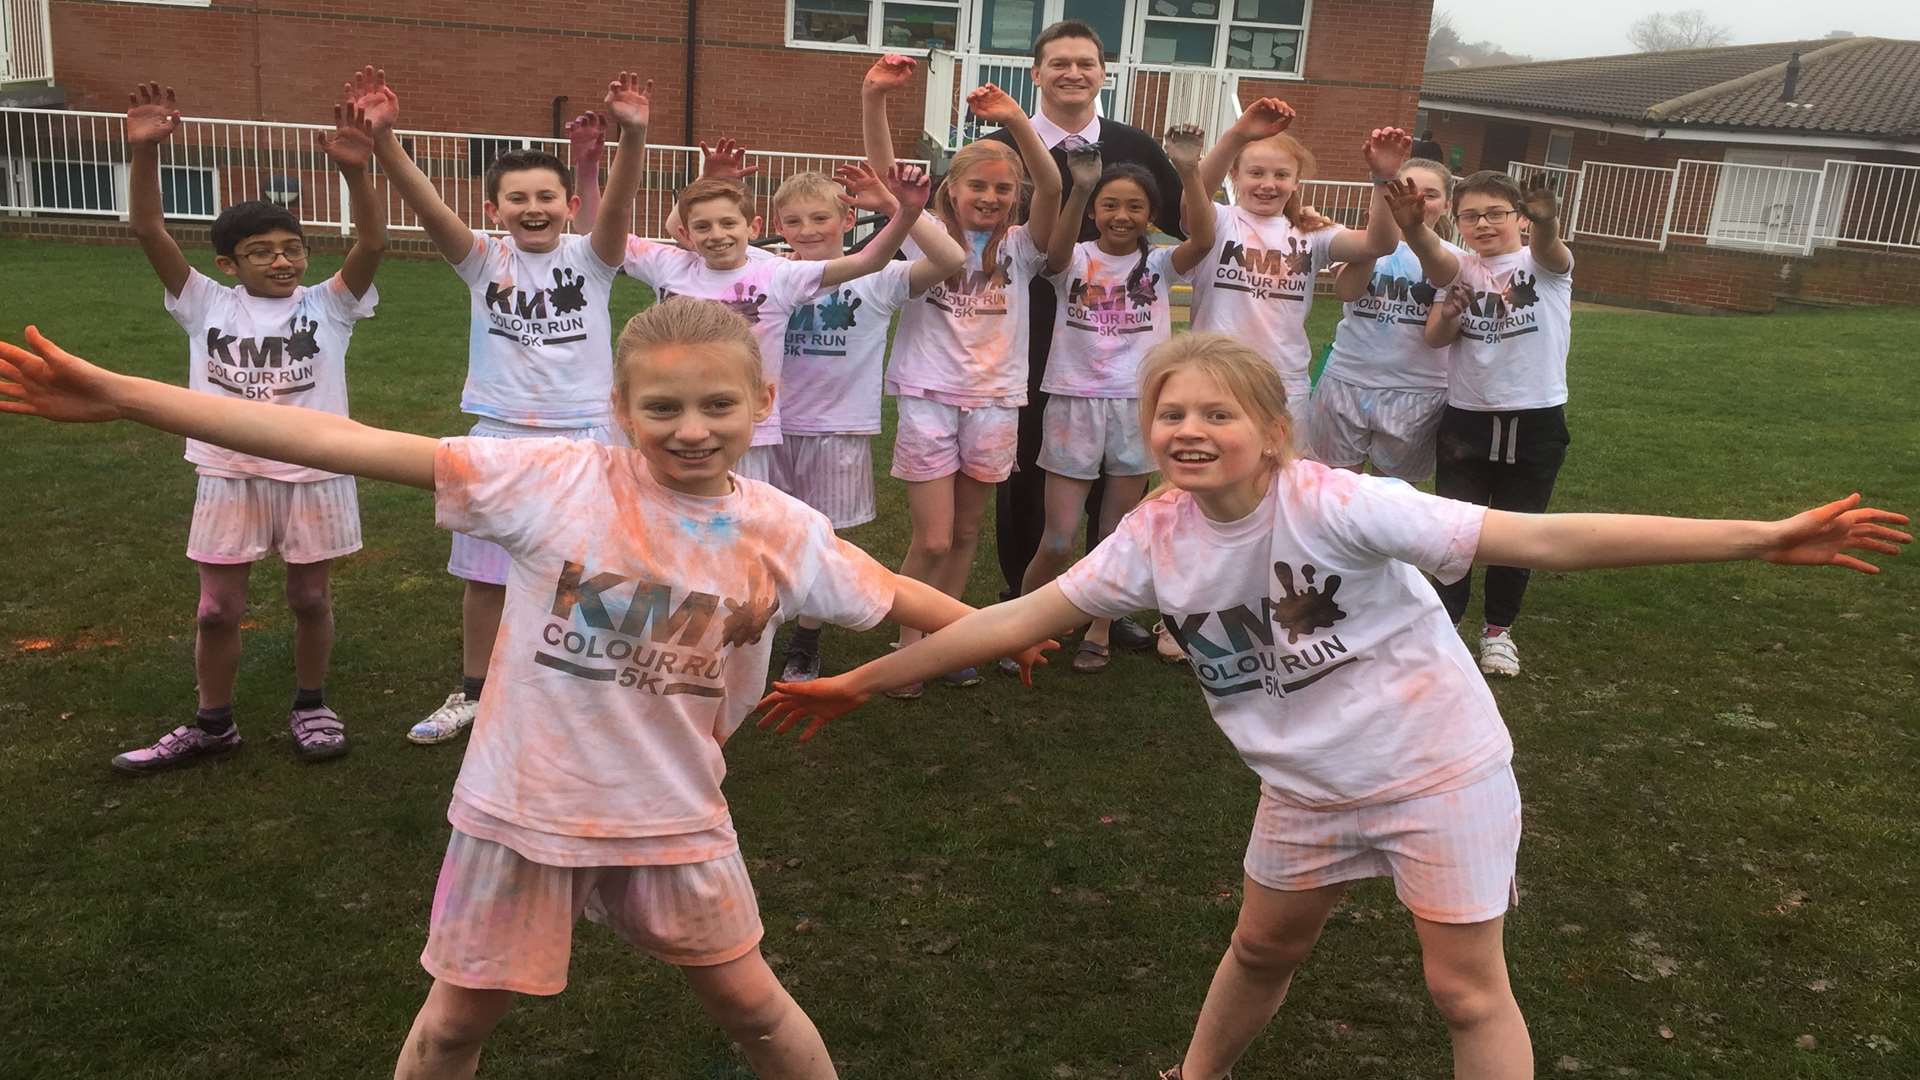 Pupils from St Mary's Catholic Primary School, Whitstable get ready for the KM Colour Run being staged on Sunday, June 11 at Betteshanger Country Park, near Deal.